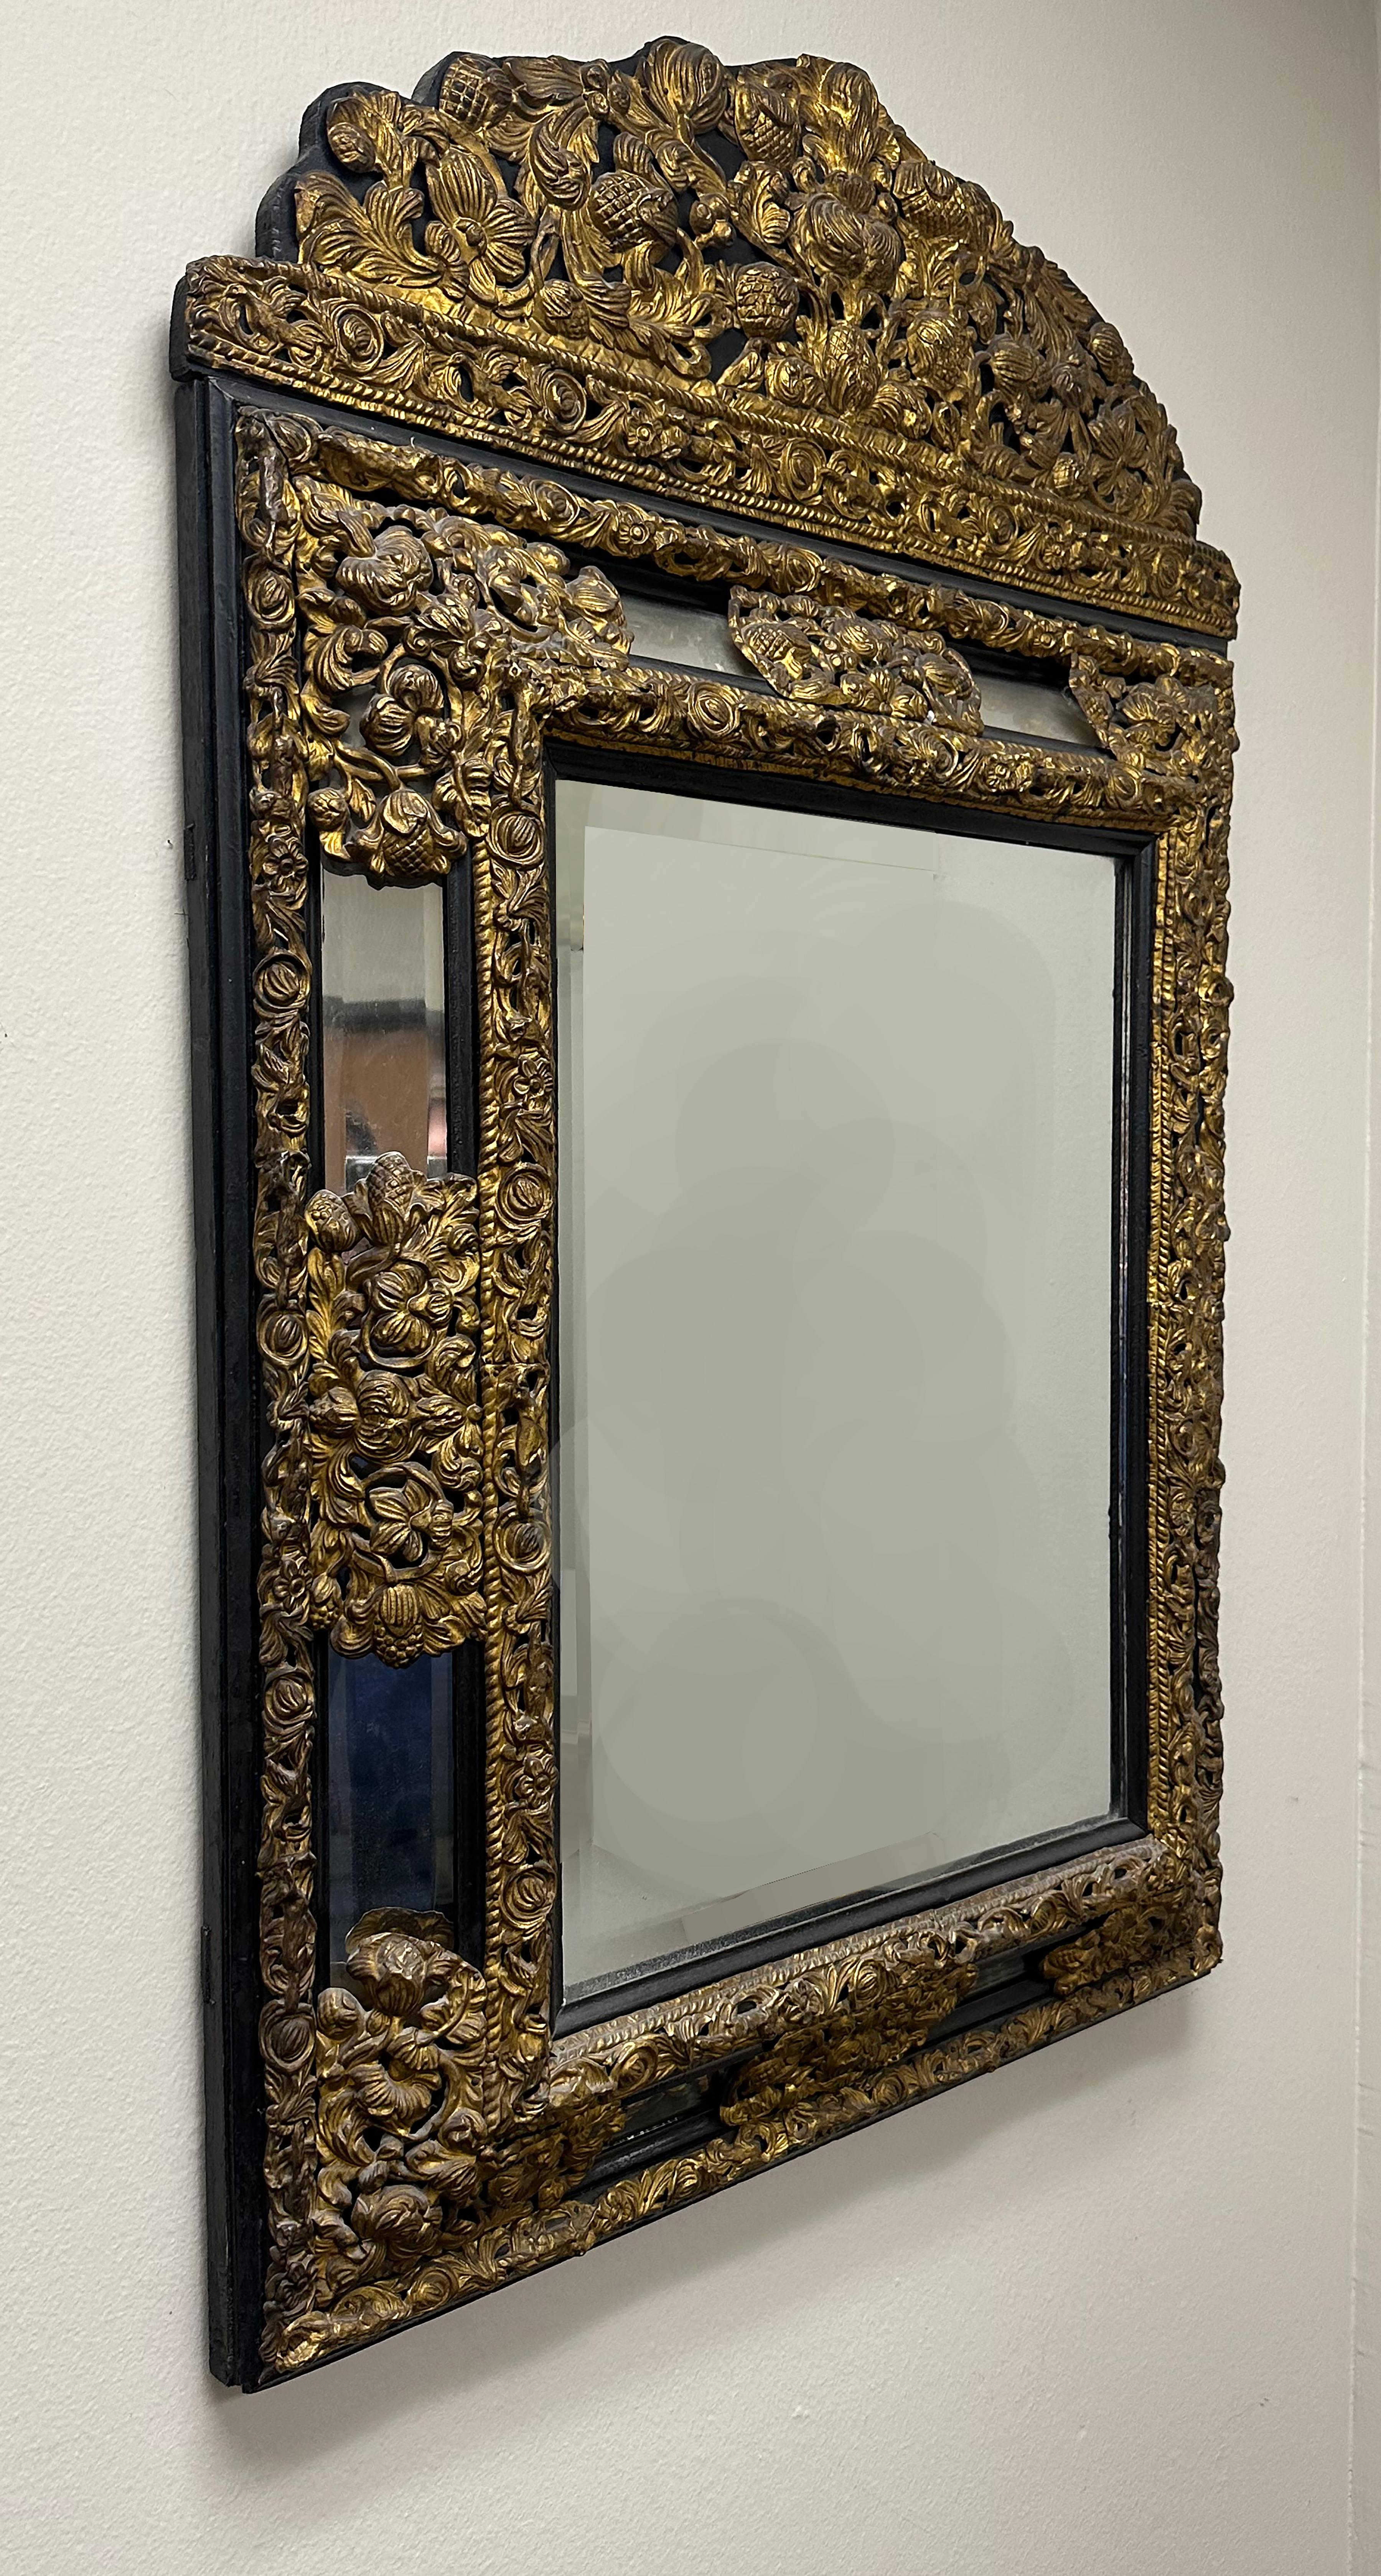 19th Century Dutch Embossed Brass and Ebony Mirror For Sale 1